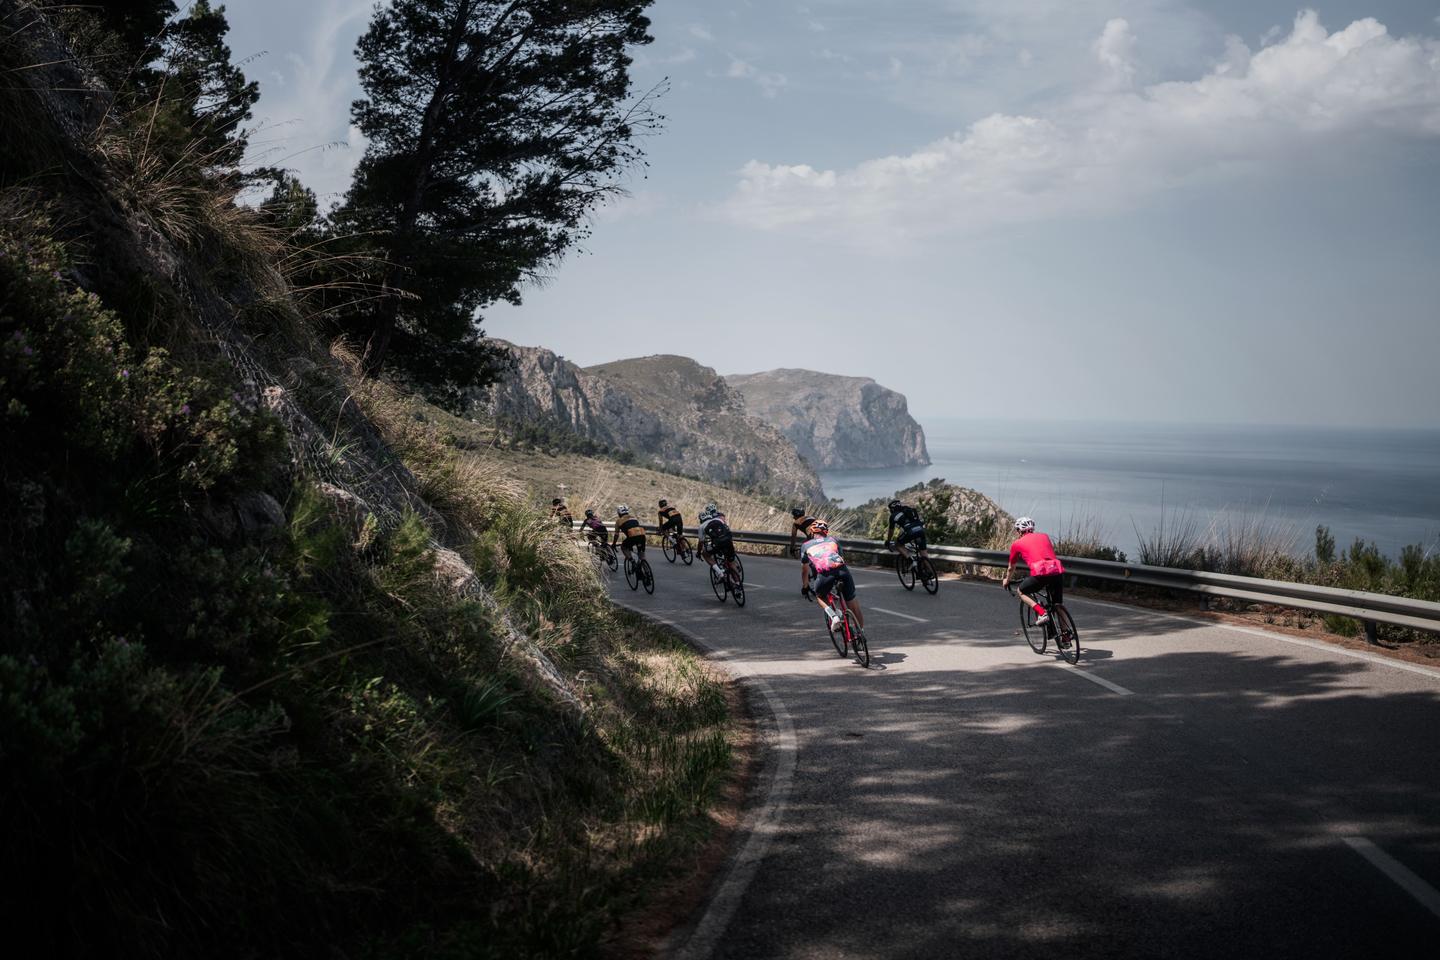 Group of cyclists riding on a coastal mountain road, with a view of cliffs and the ocean in the background. The road is surrounded by lush vegetation and trees under a cloudy sky.